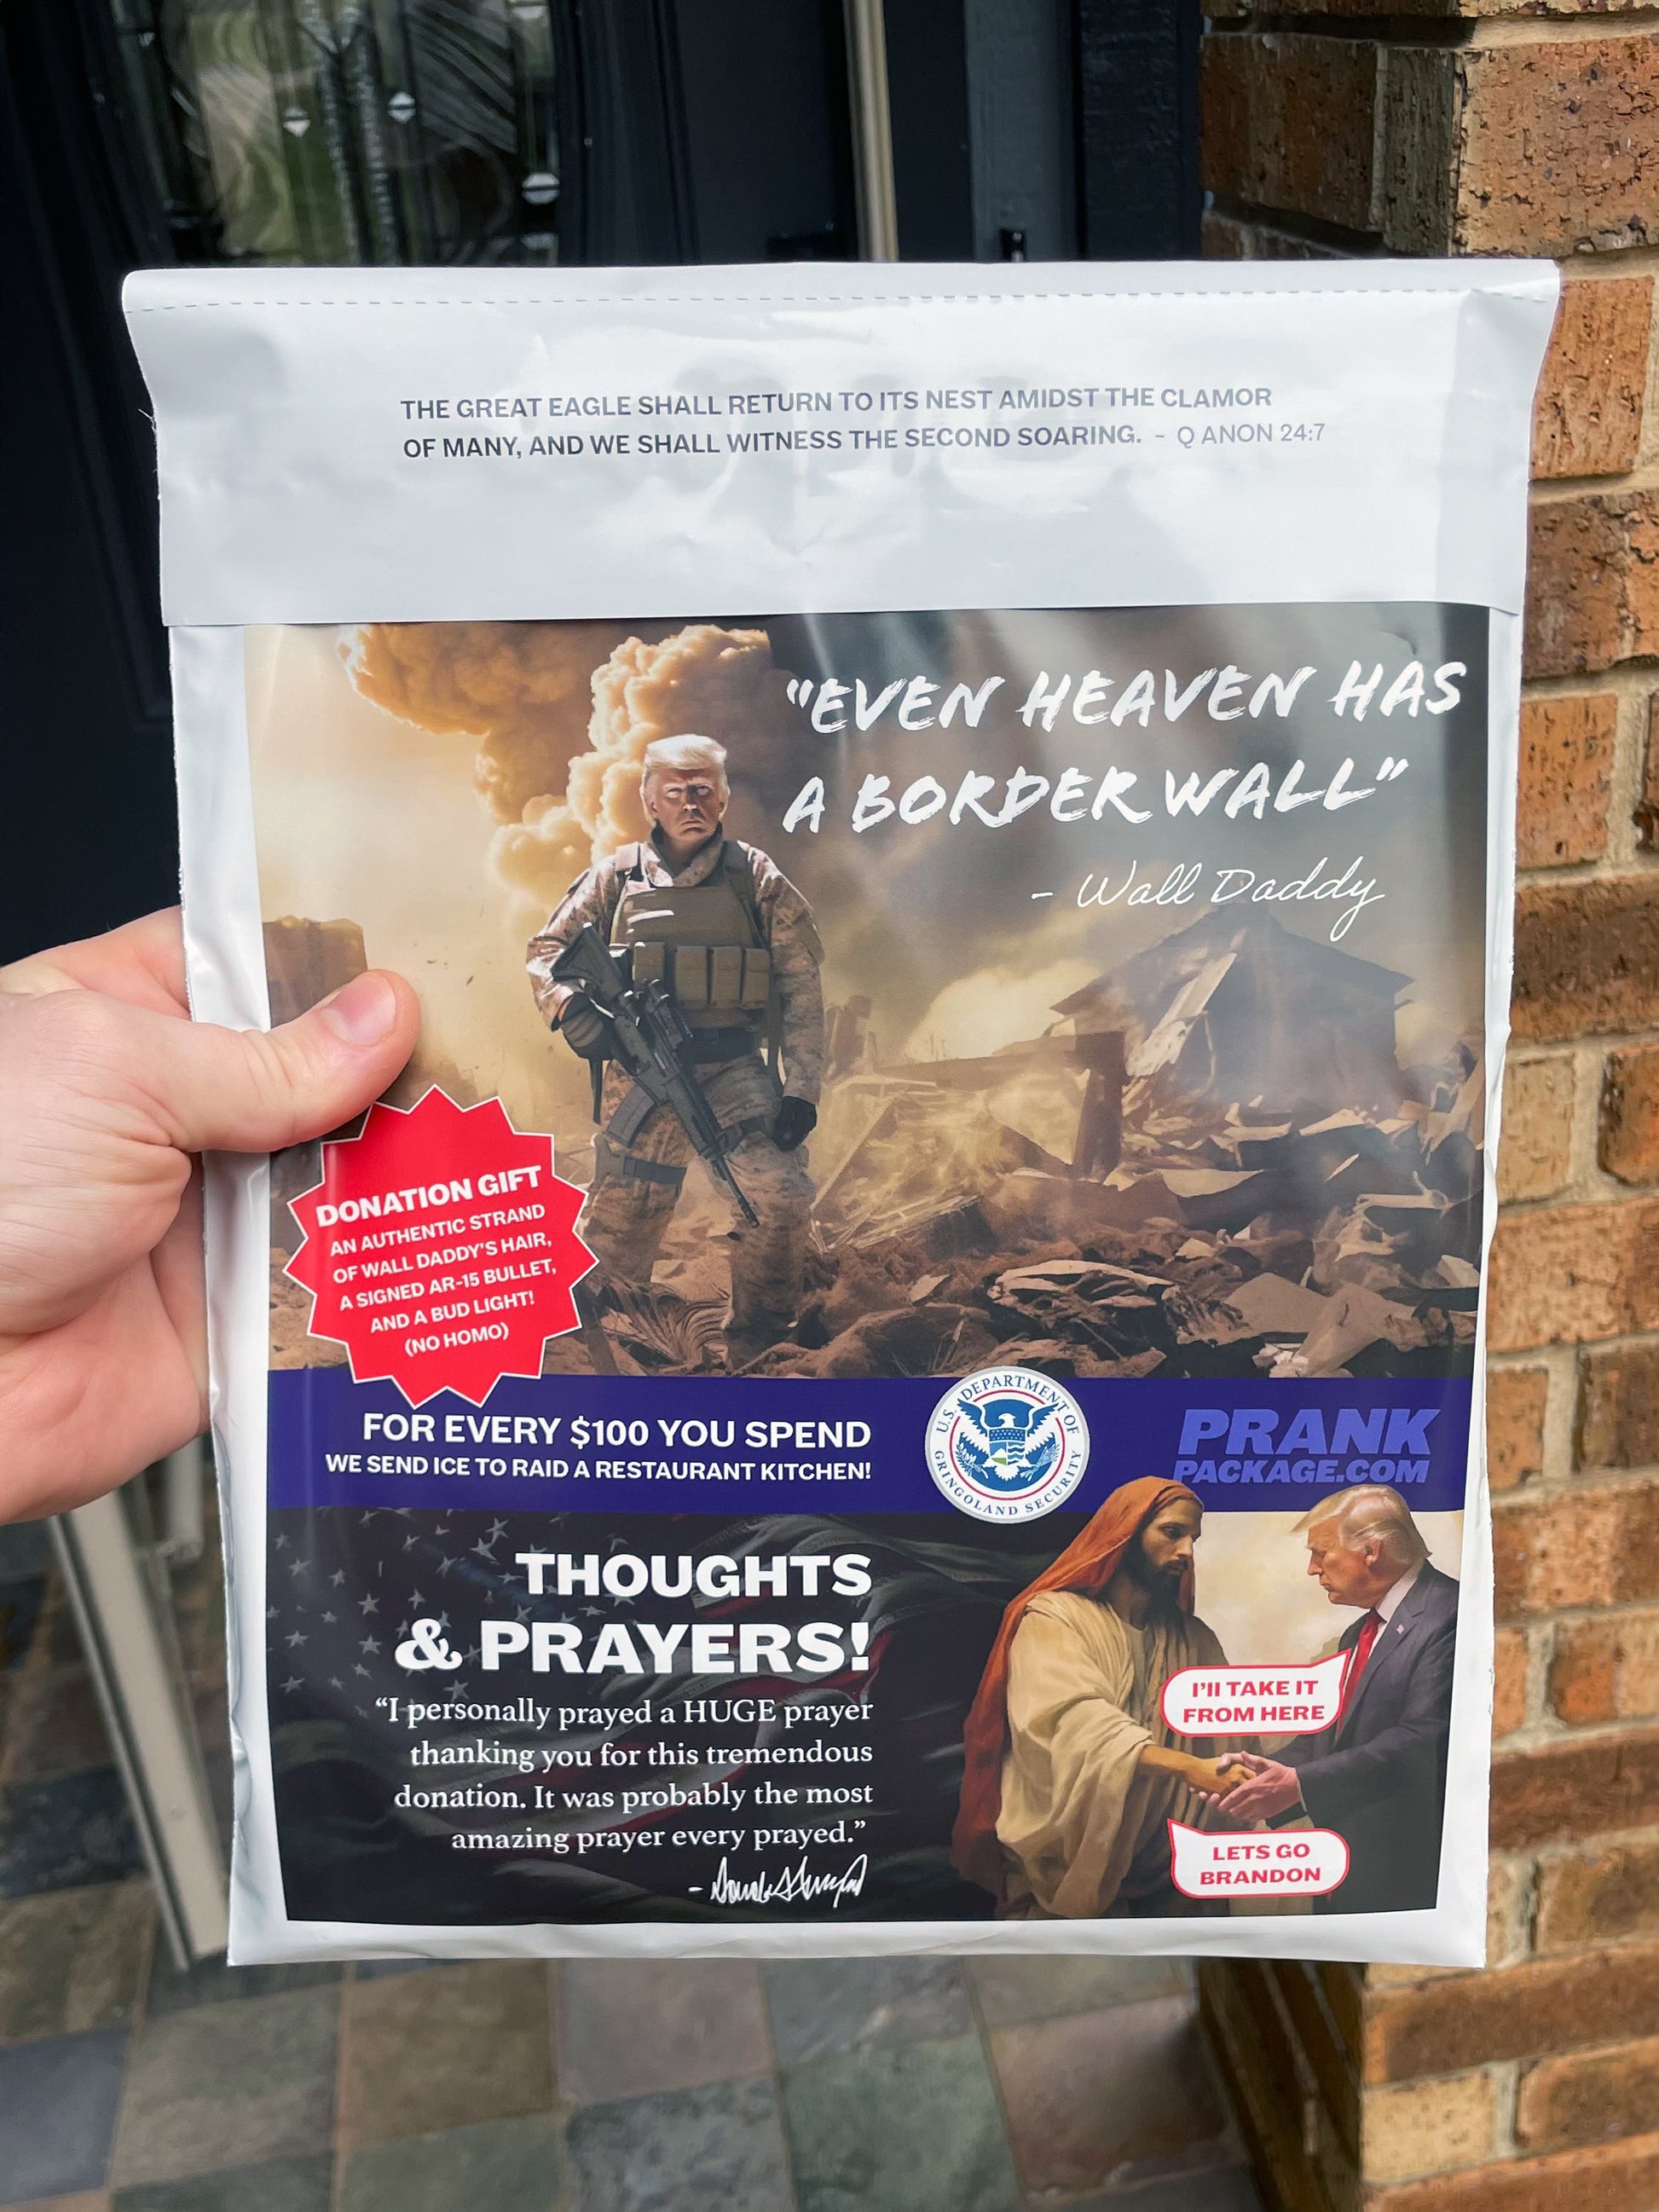 POV of mailman reading the back of the Trump prank package. Featuring hysterical text, "For every $100 you spend, we send ICE to raid a restaurant kitchen!"